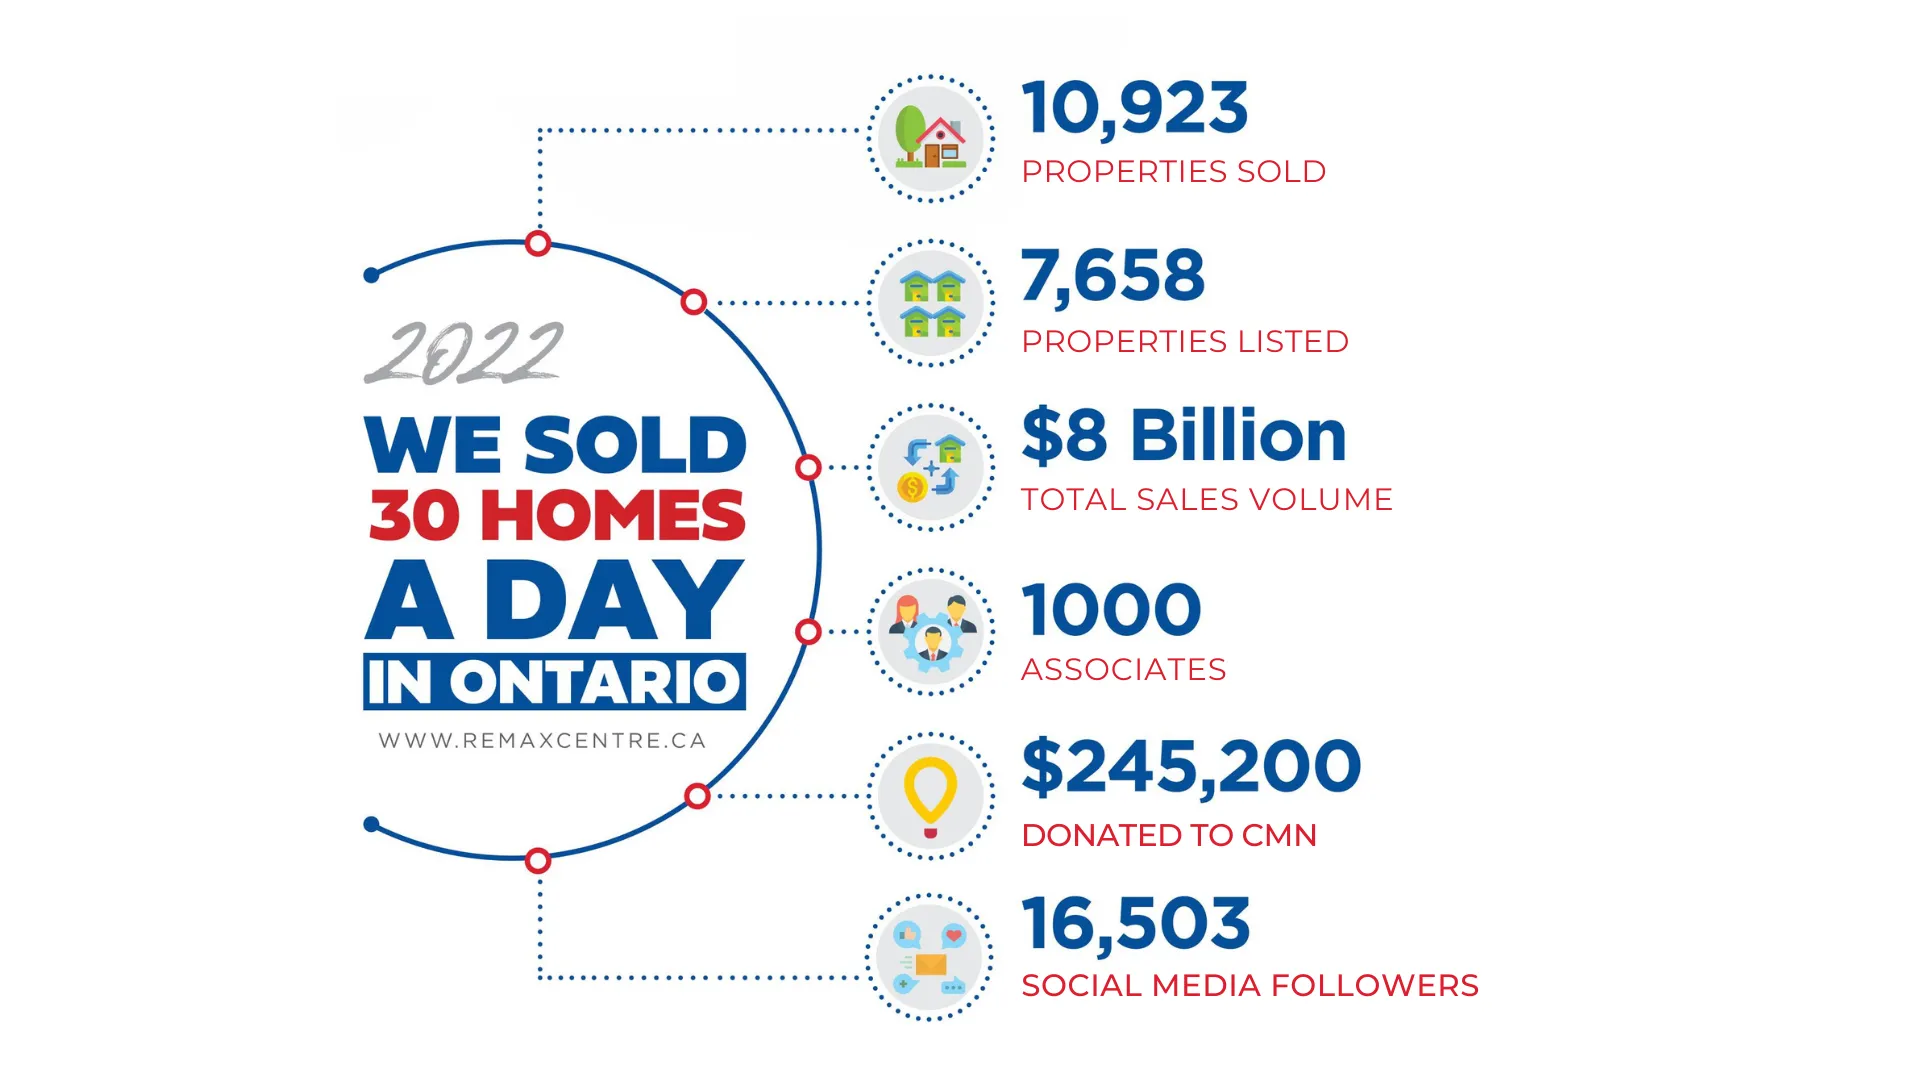 Photograph of Awards and Sales Volume for REMAX Real Estate Centre 2022